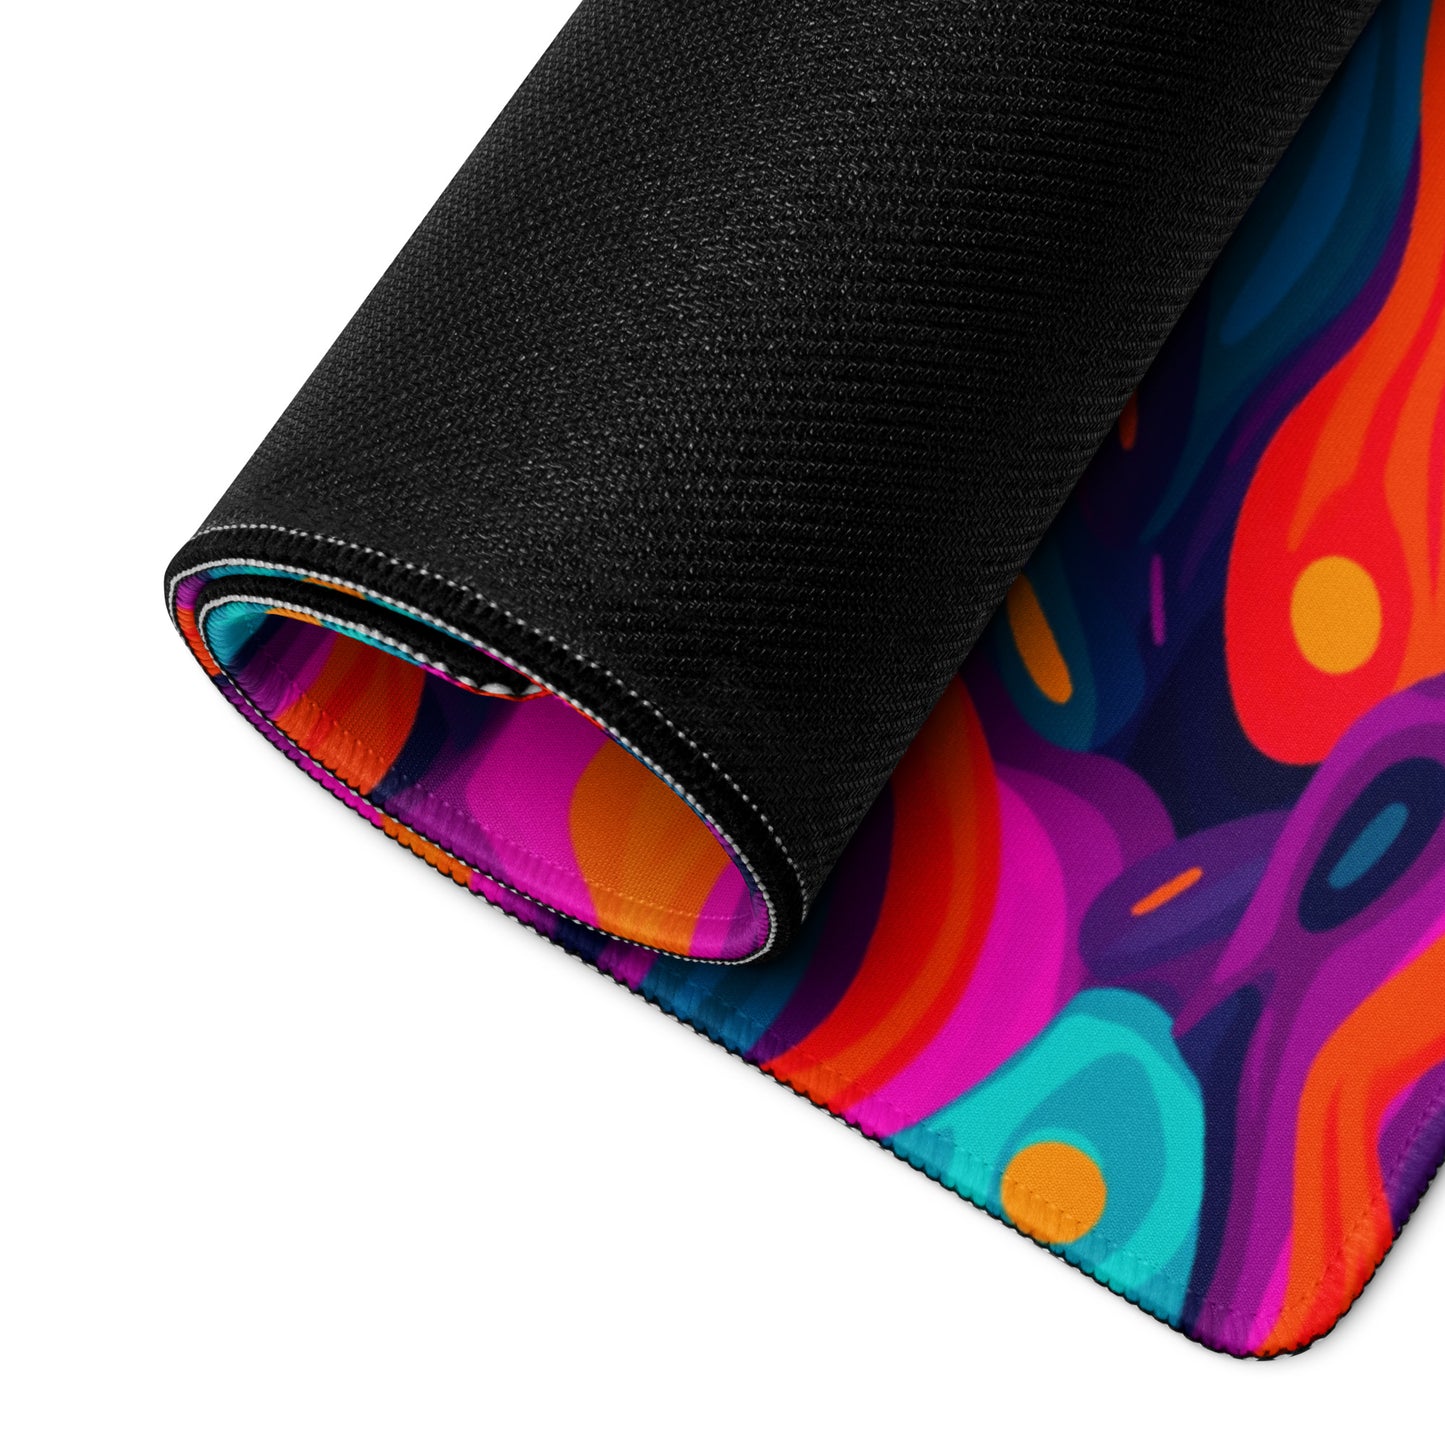 A 36" x 18" desk pad with a wavy abstract pattern on it rolled up. Blue, Purple and Red in color.